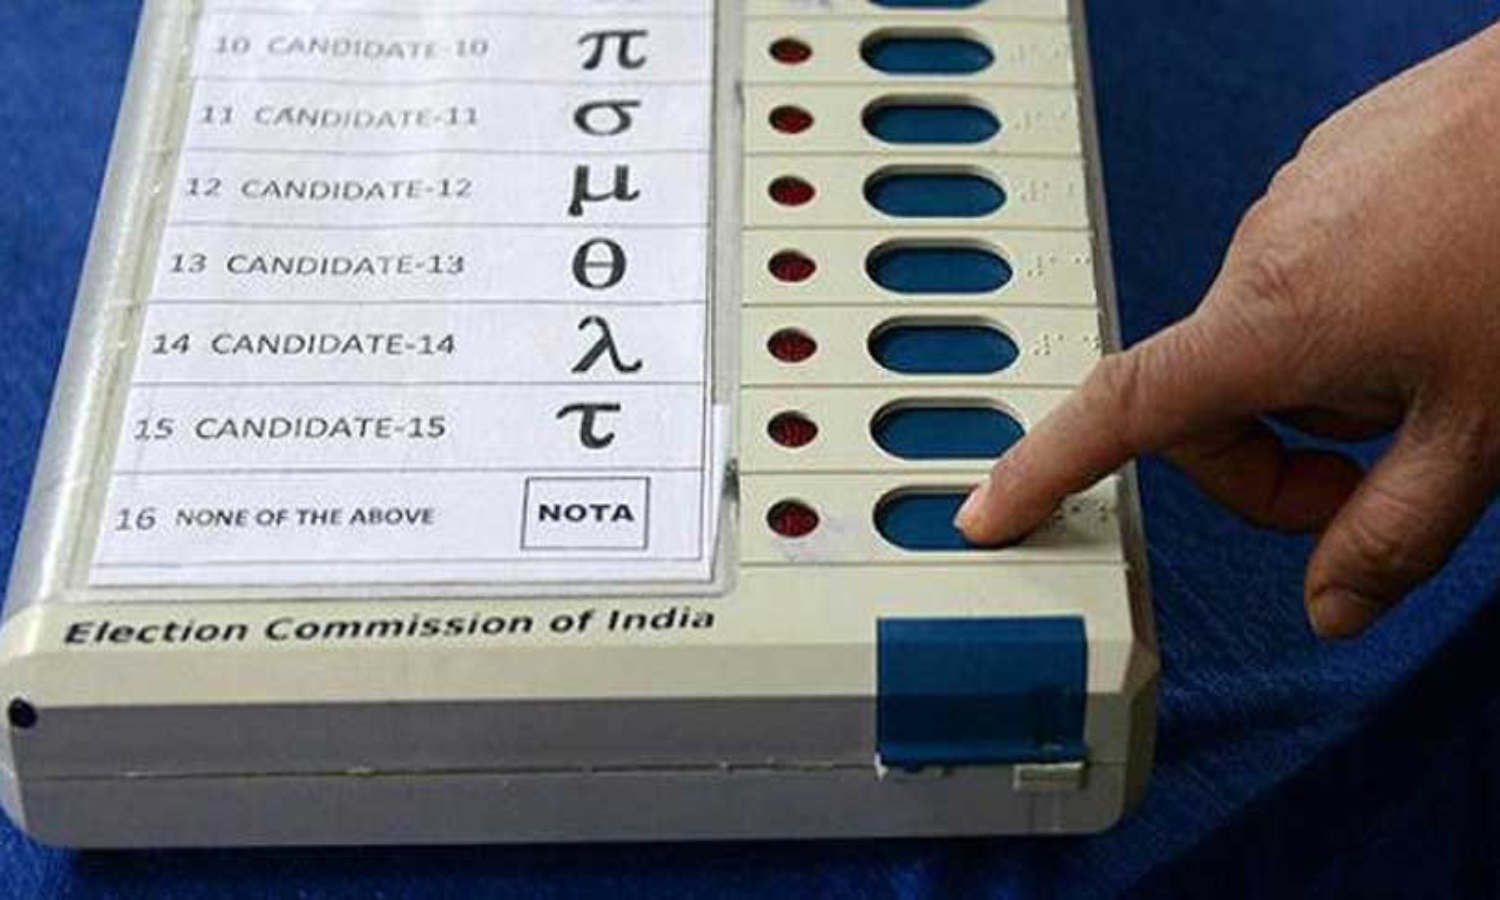 BJP leader’s minor son allegedly casts vote; probe launched